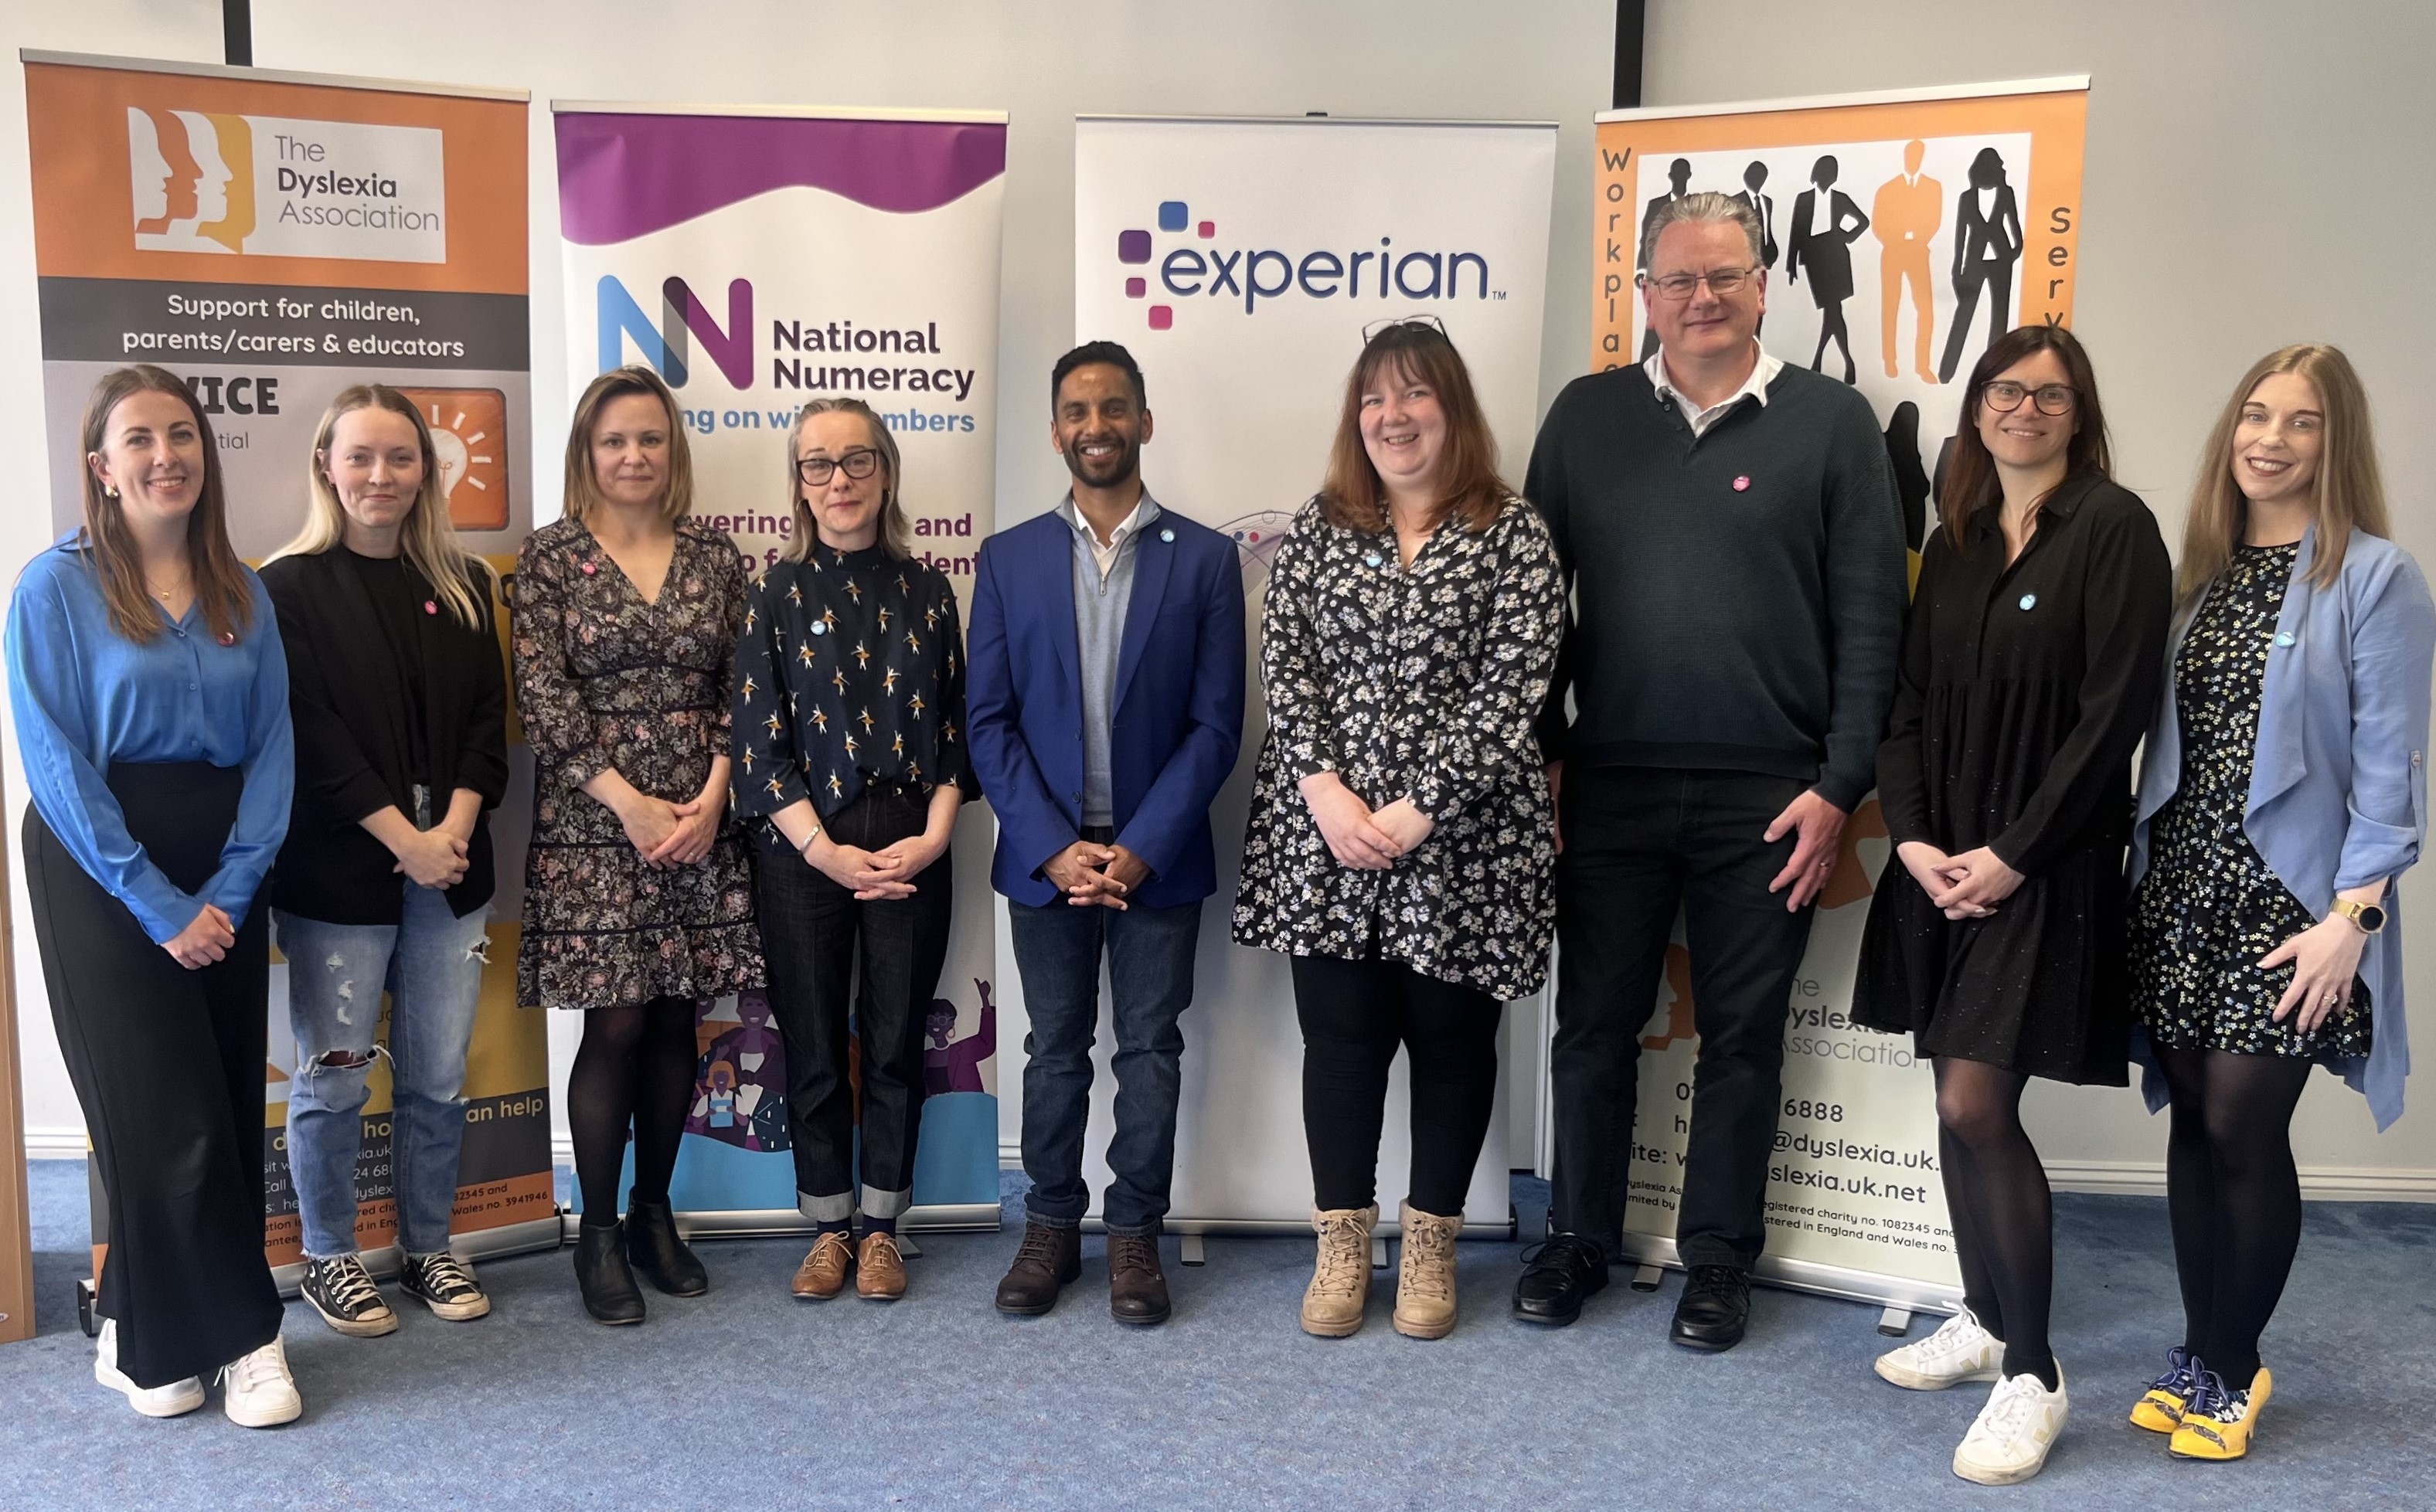 Bobby Seagull with the Dyslexia Association and Experian volunteers